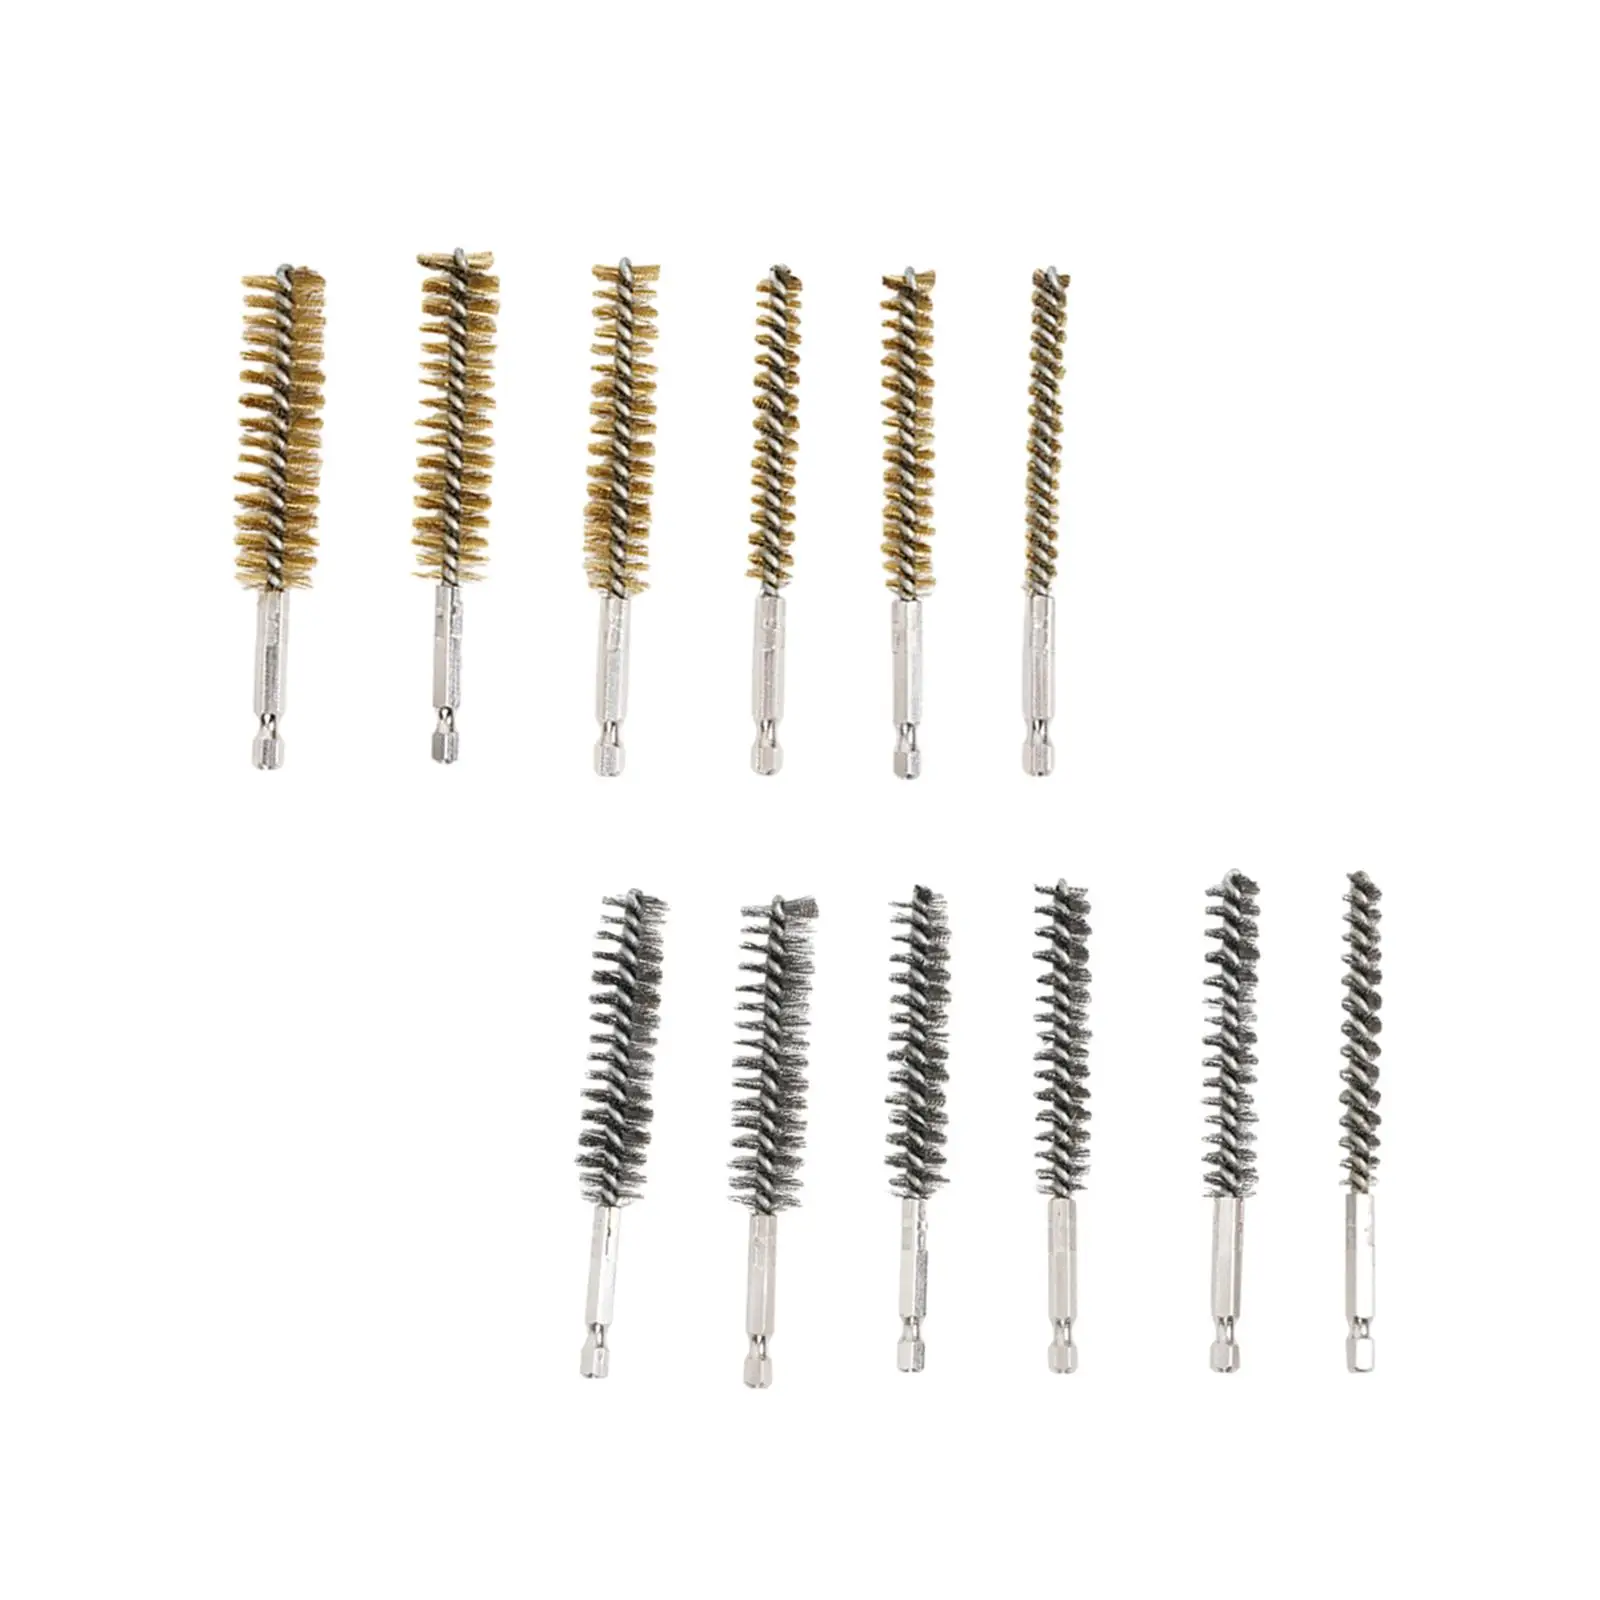 6x 8mm 10mm 12mm 15mm 17mm 19mm Bore Cleaning Brush for Electric Drill Impact Machining Polishing Power Drill Automotive